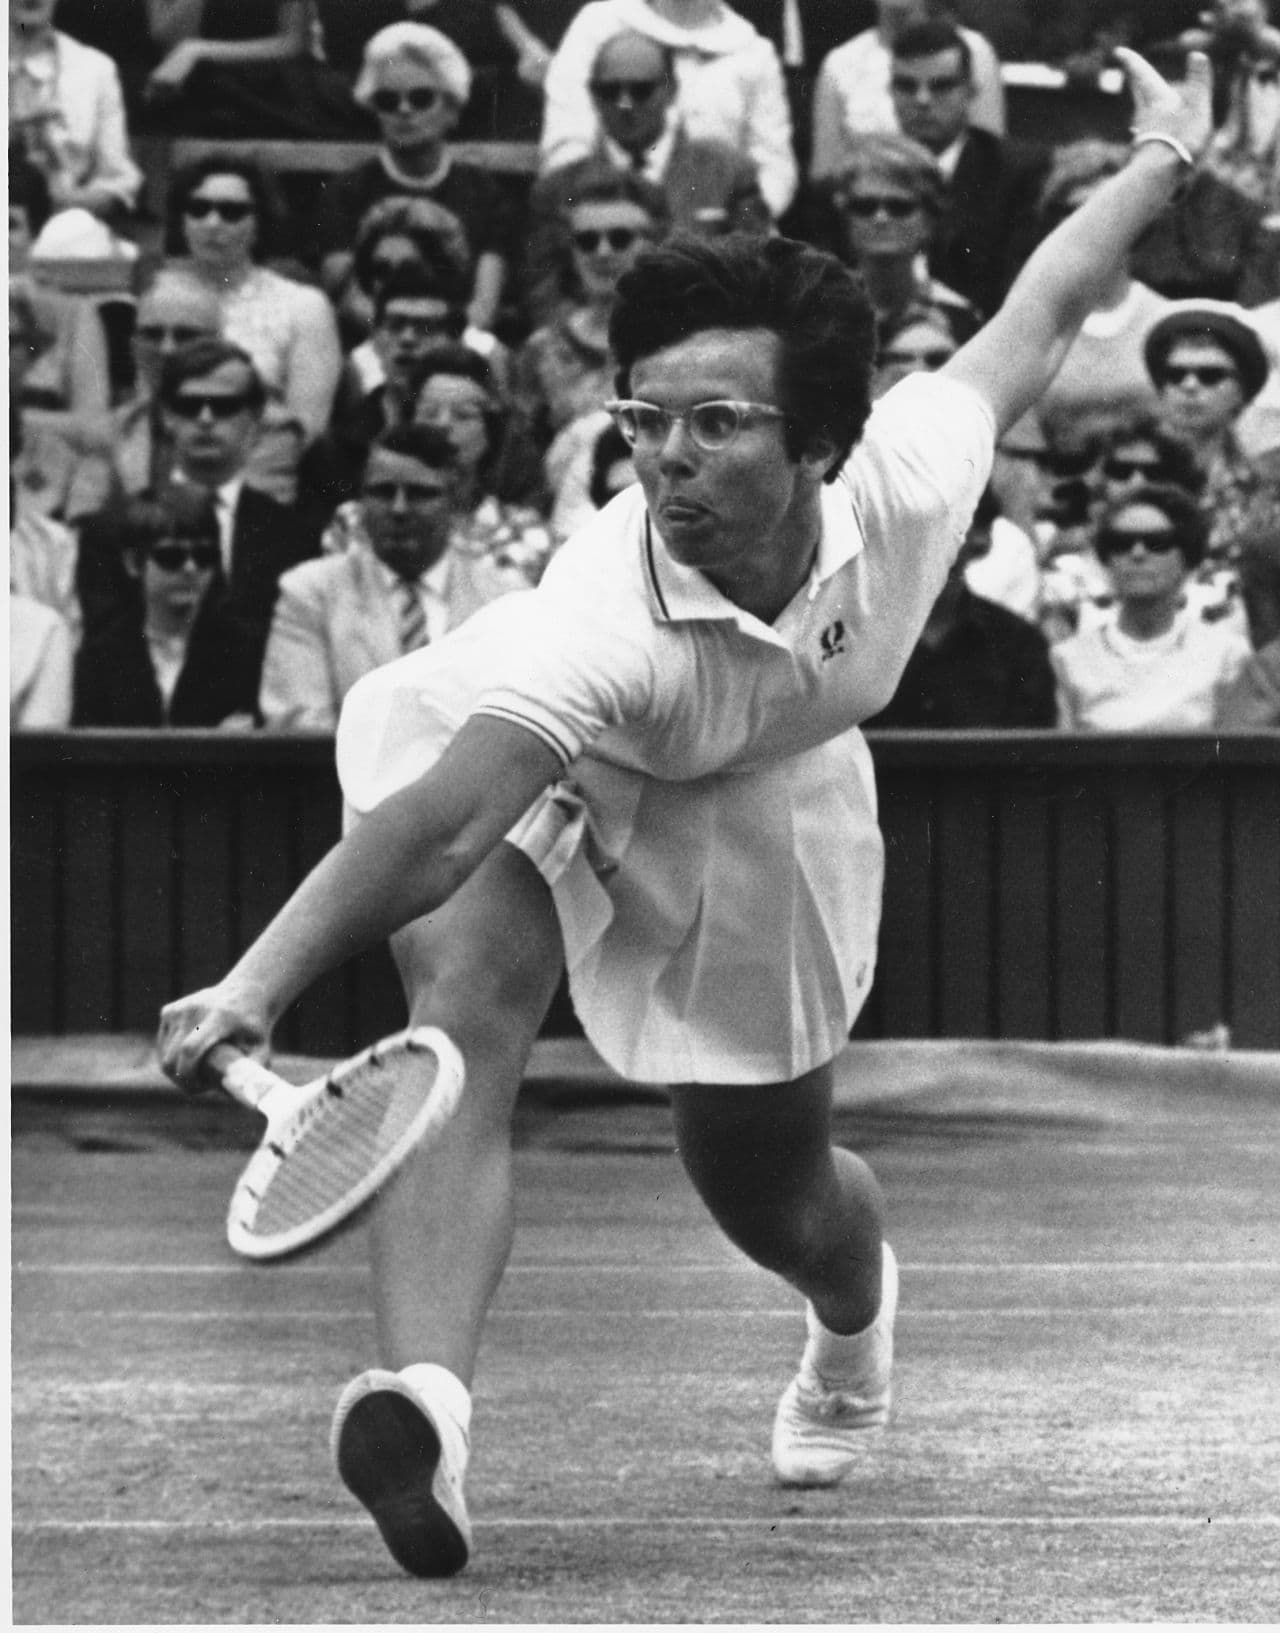 Vulgarity Horn Egomania Billie Jean King: My Tennis Career Was 'Secondary To Changing Things' |  Here & Now